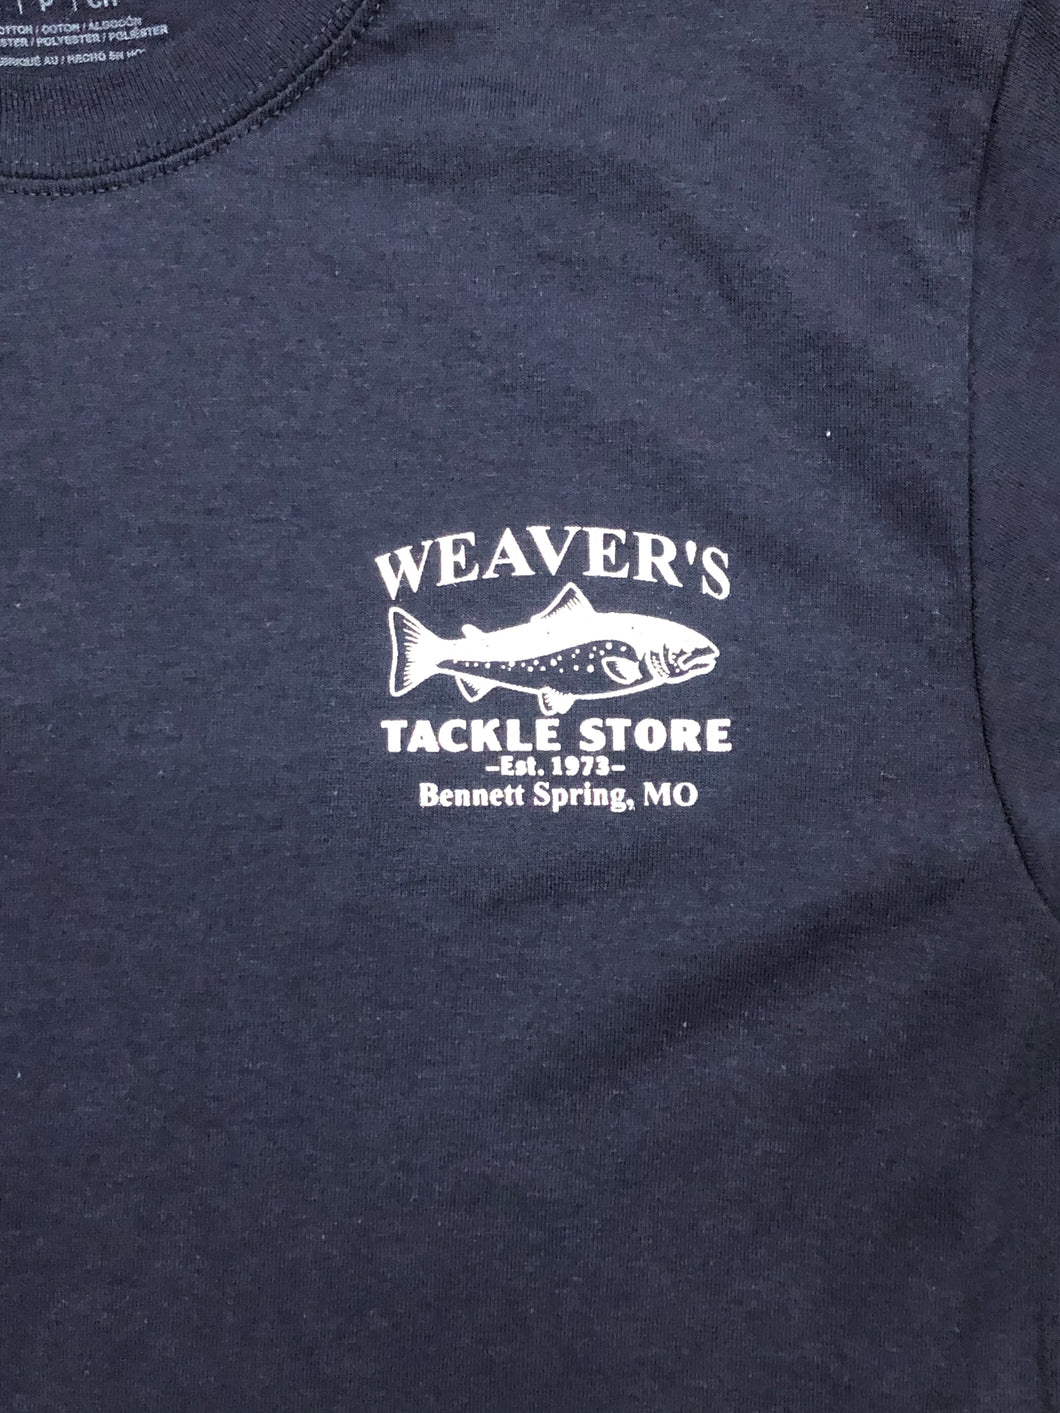 Let's Tie one on -Weavers Tackle Store